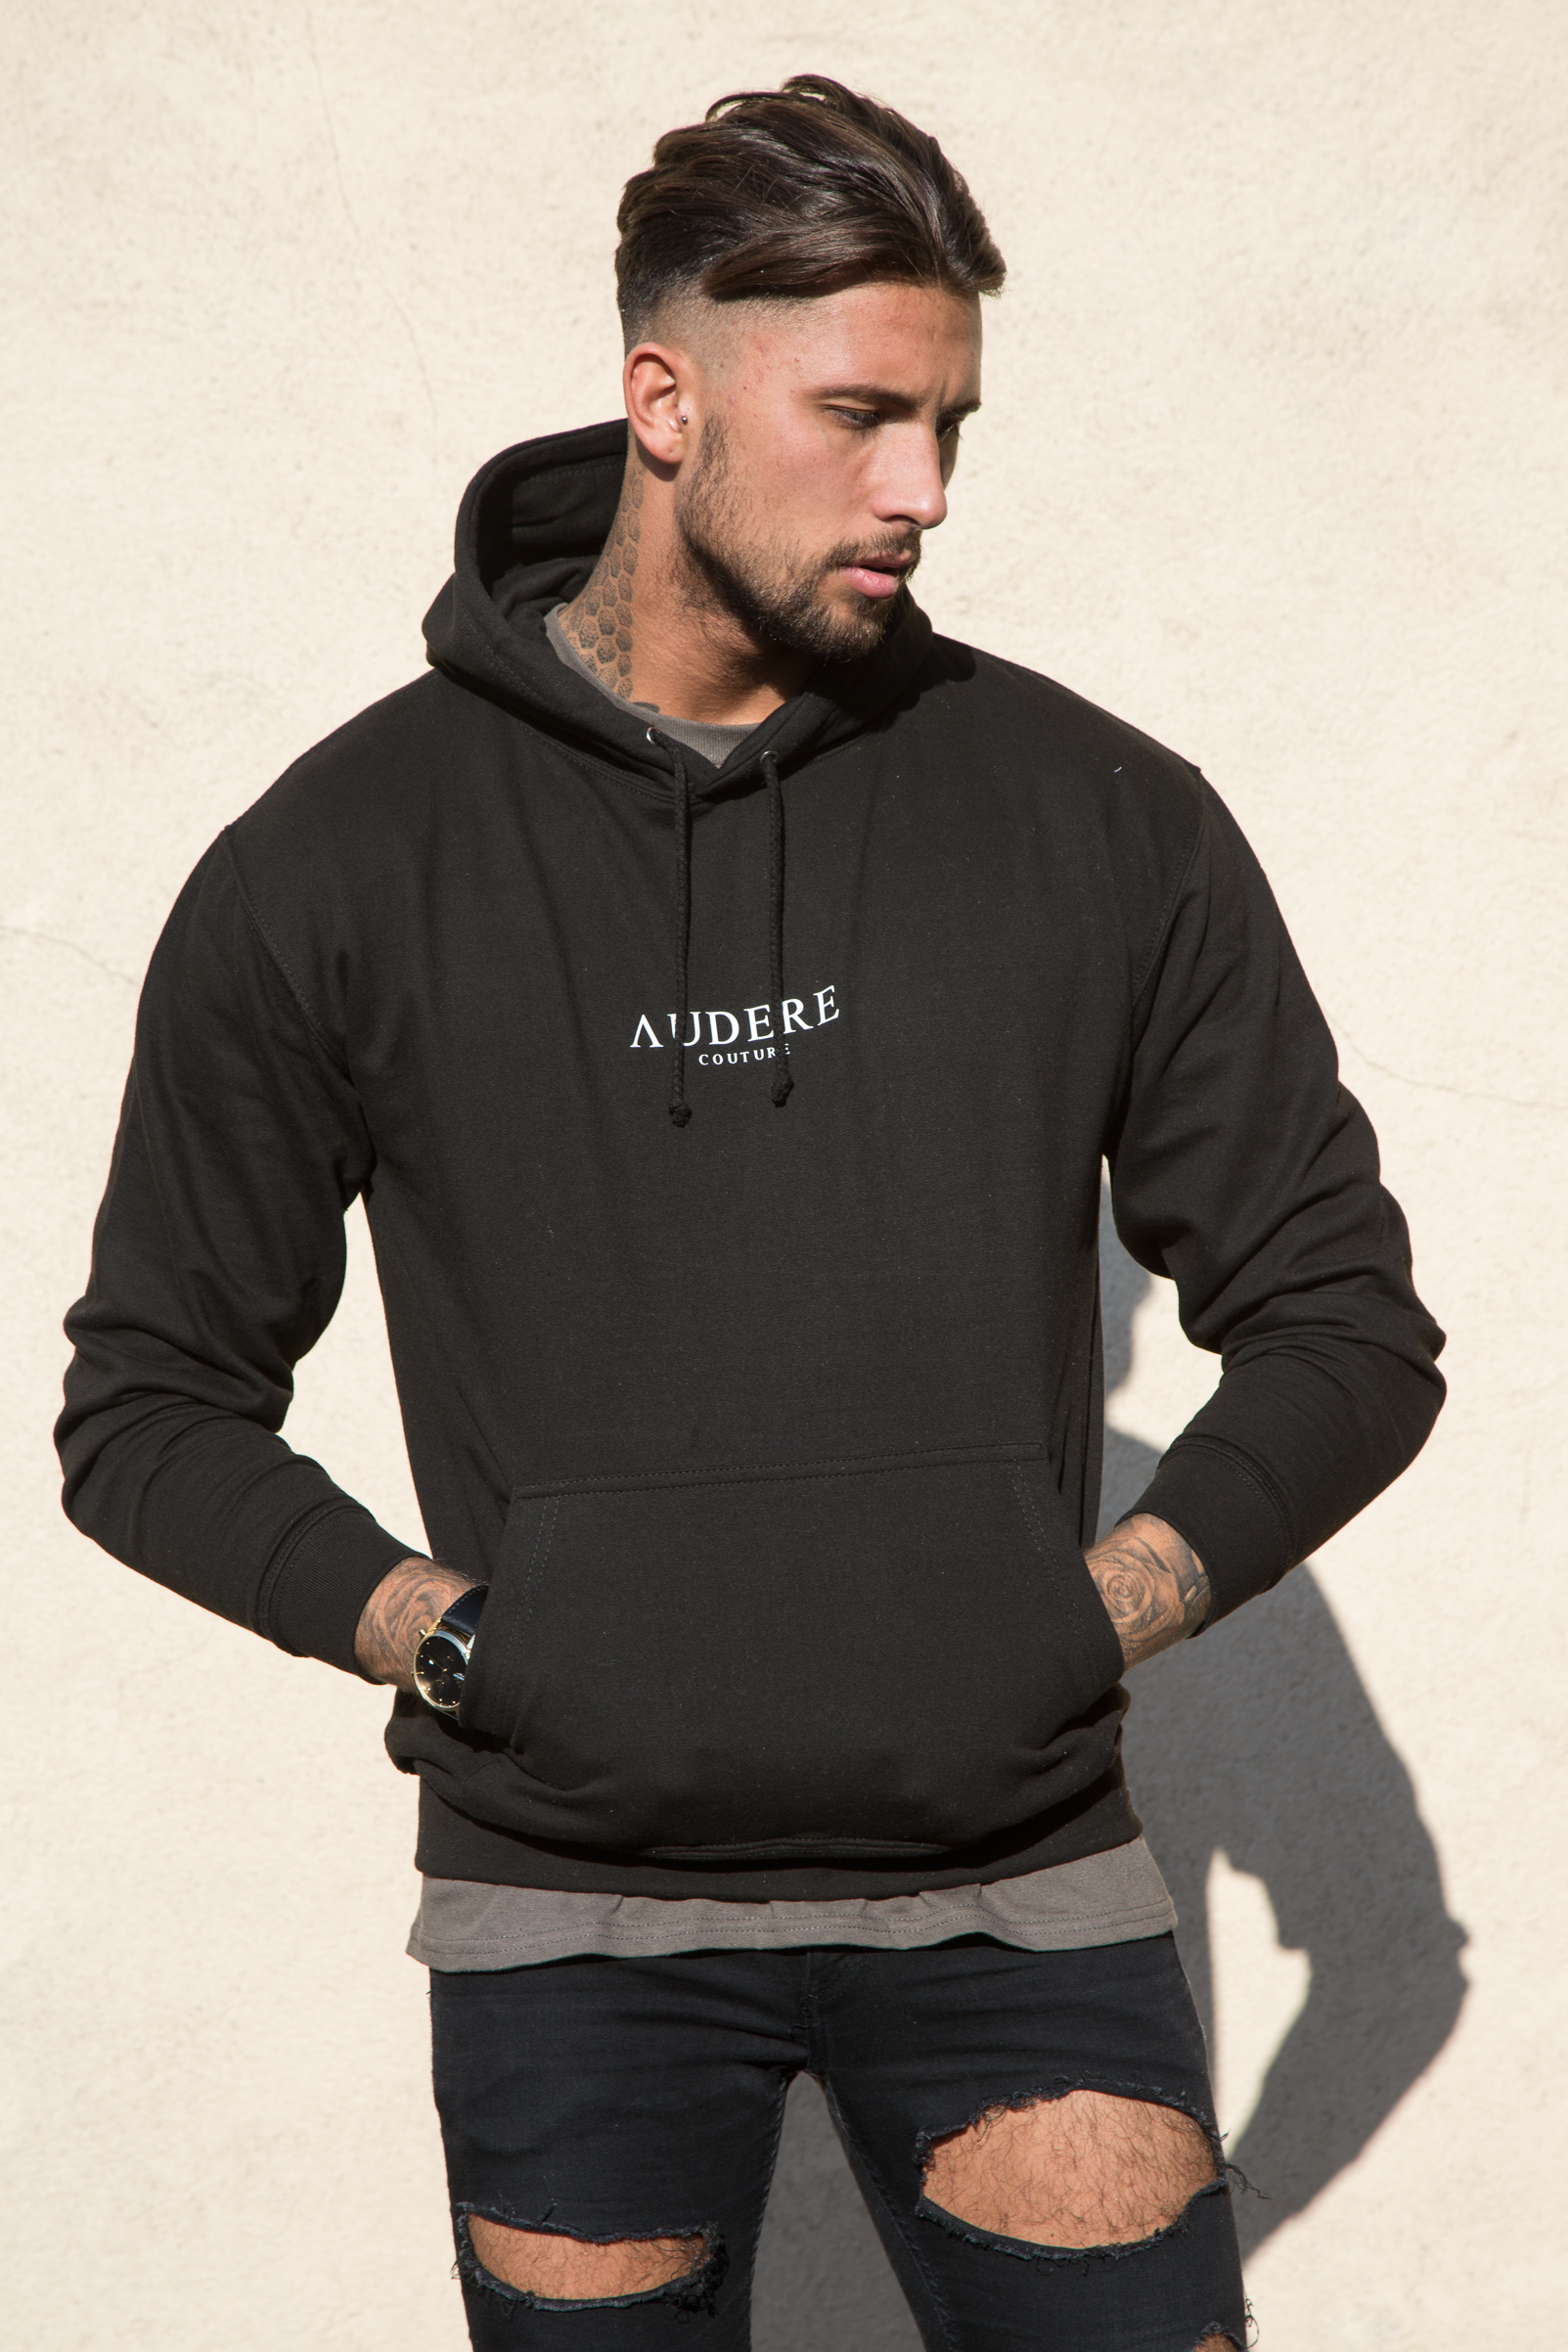 Black Hoodie White Print – Audere Couture